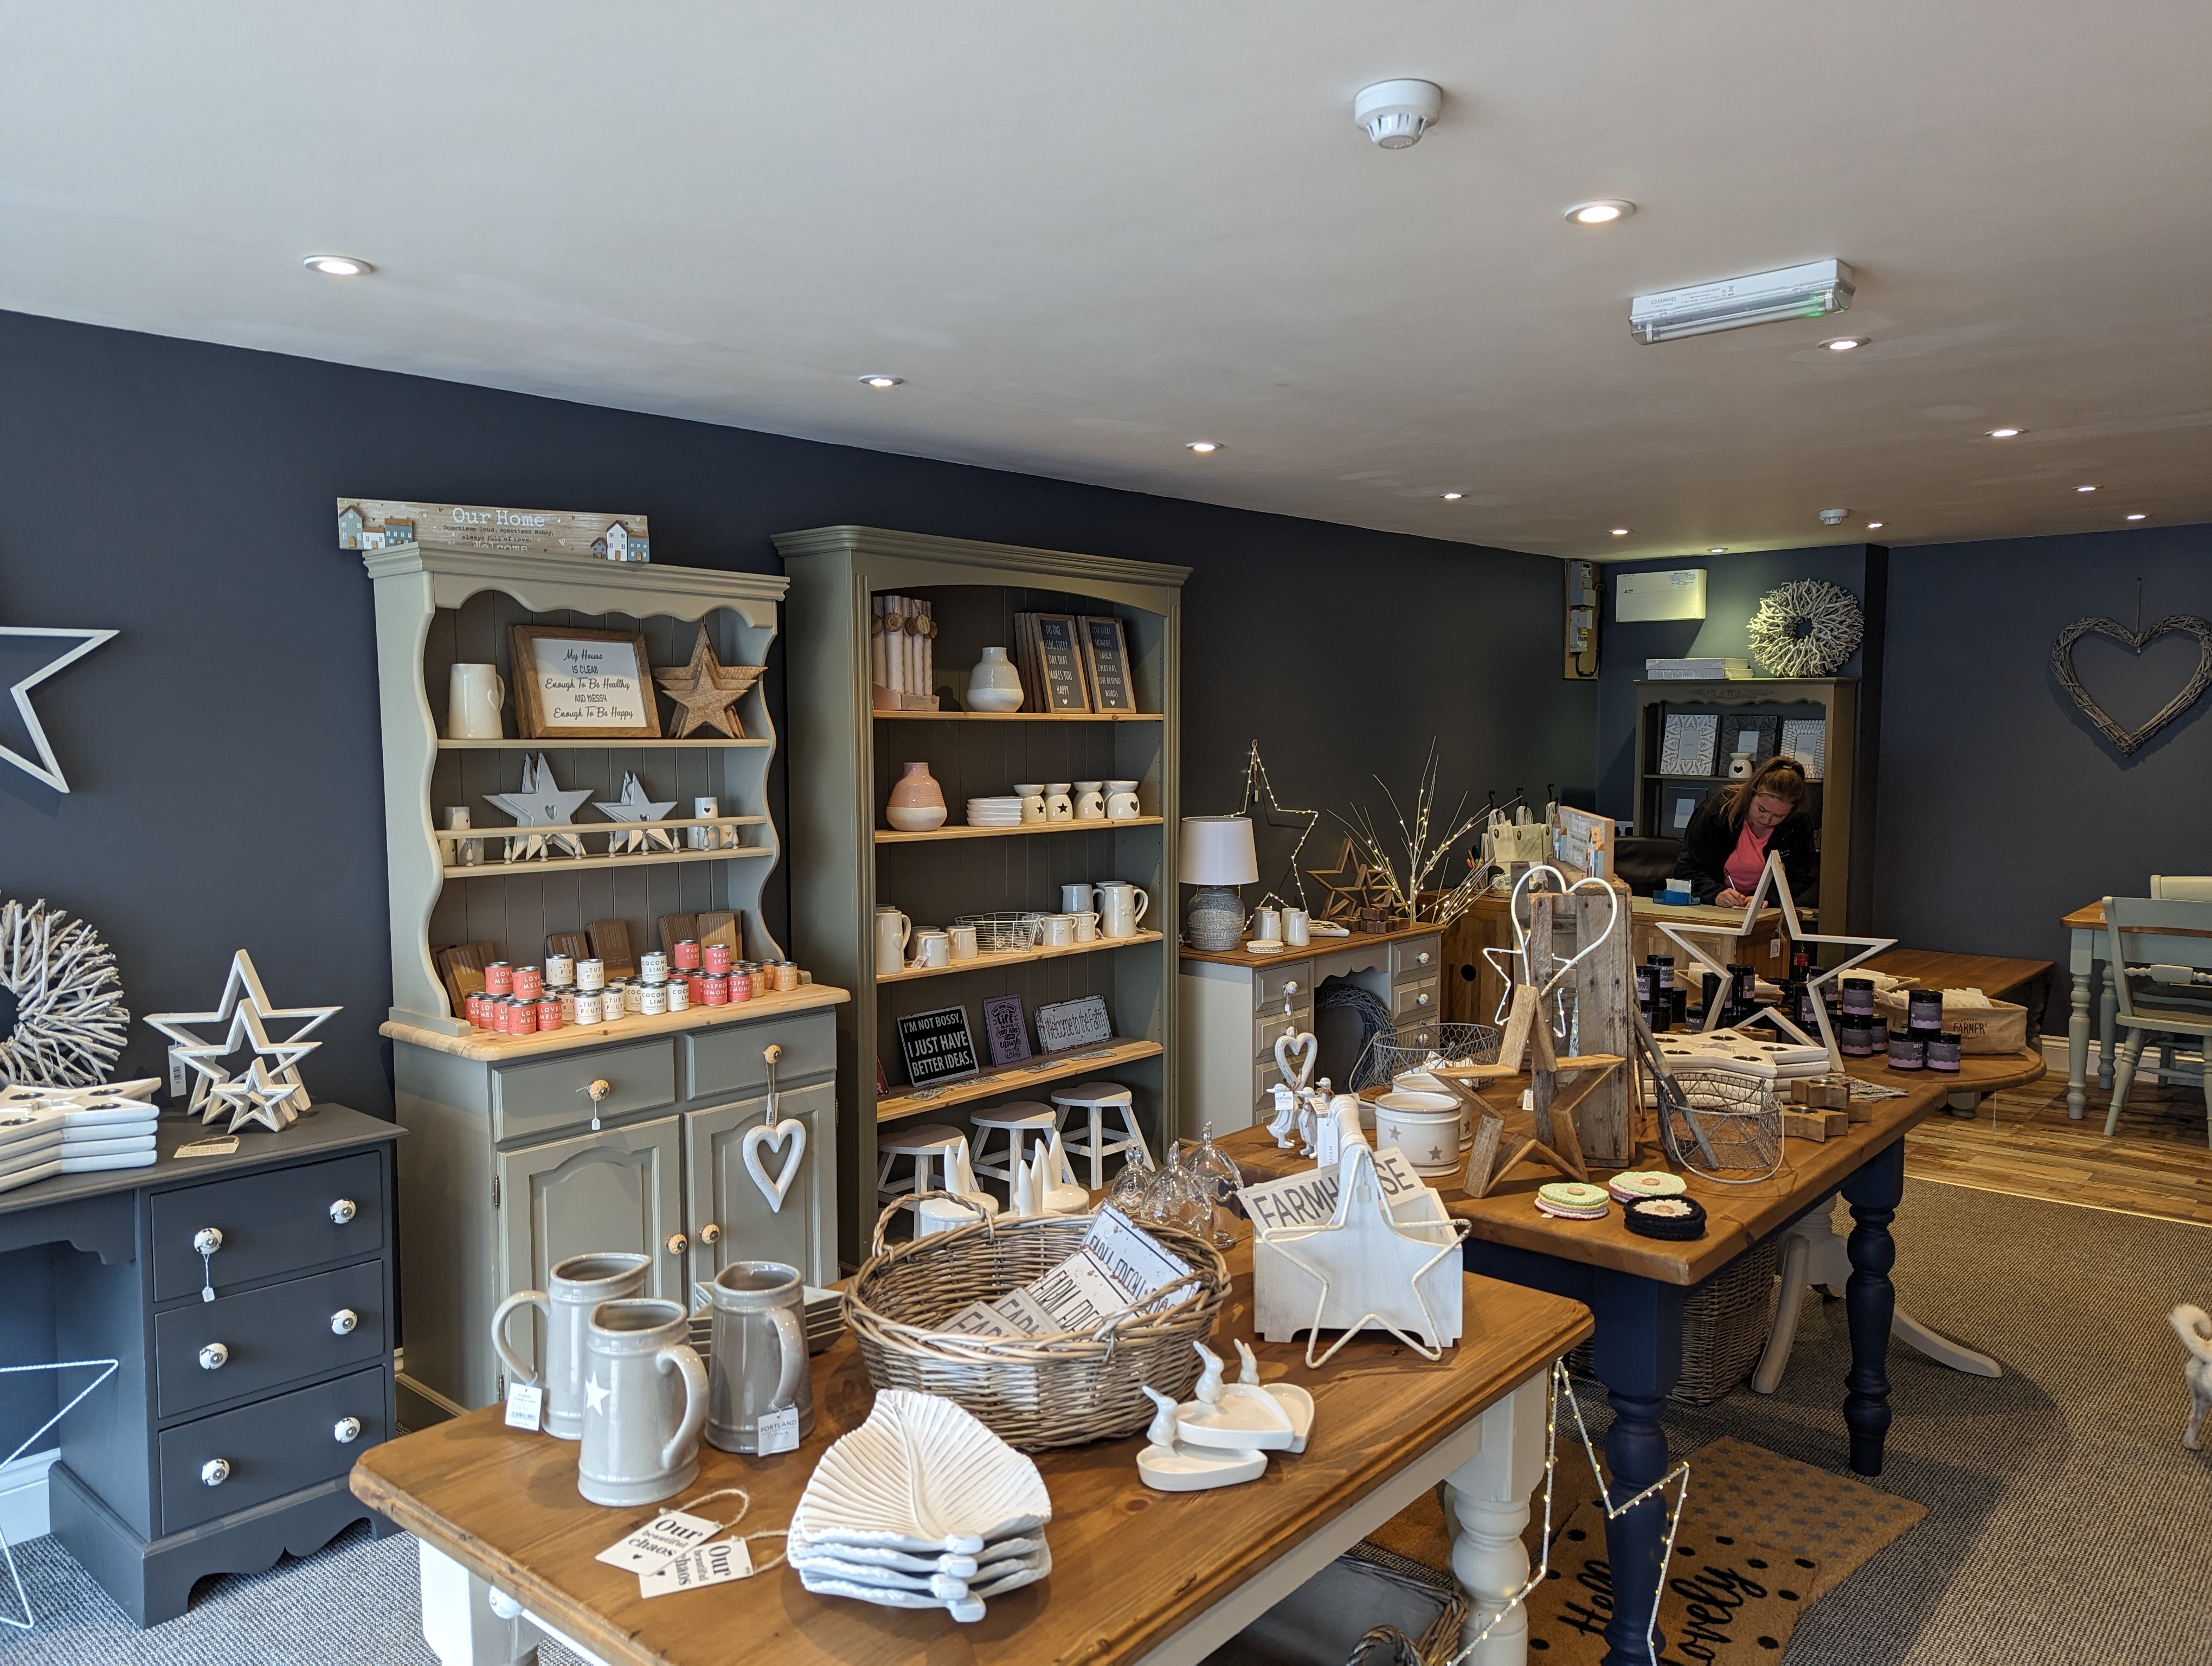 The shop sells a range of homeware and gifts (Nub News)